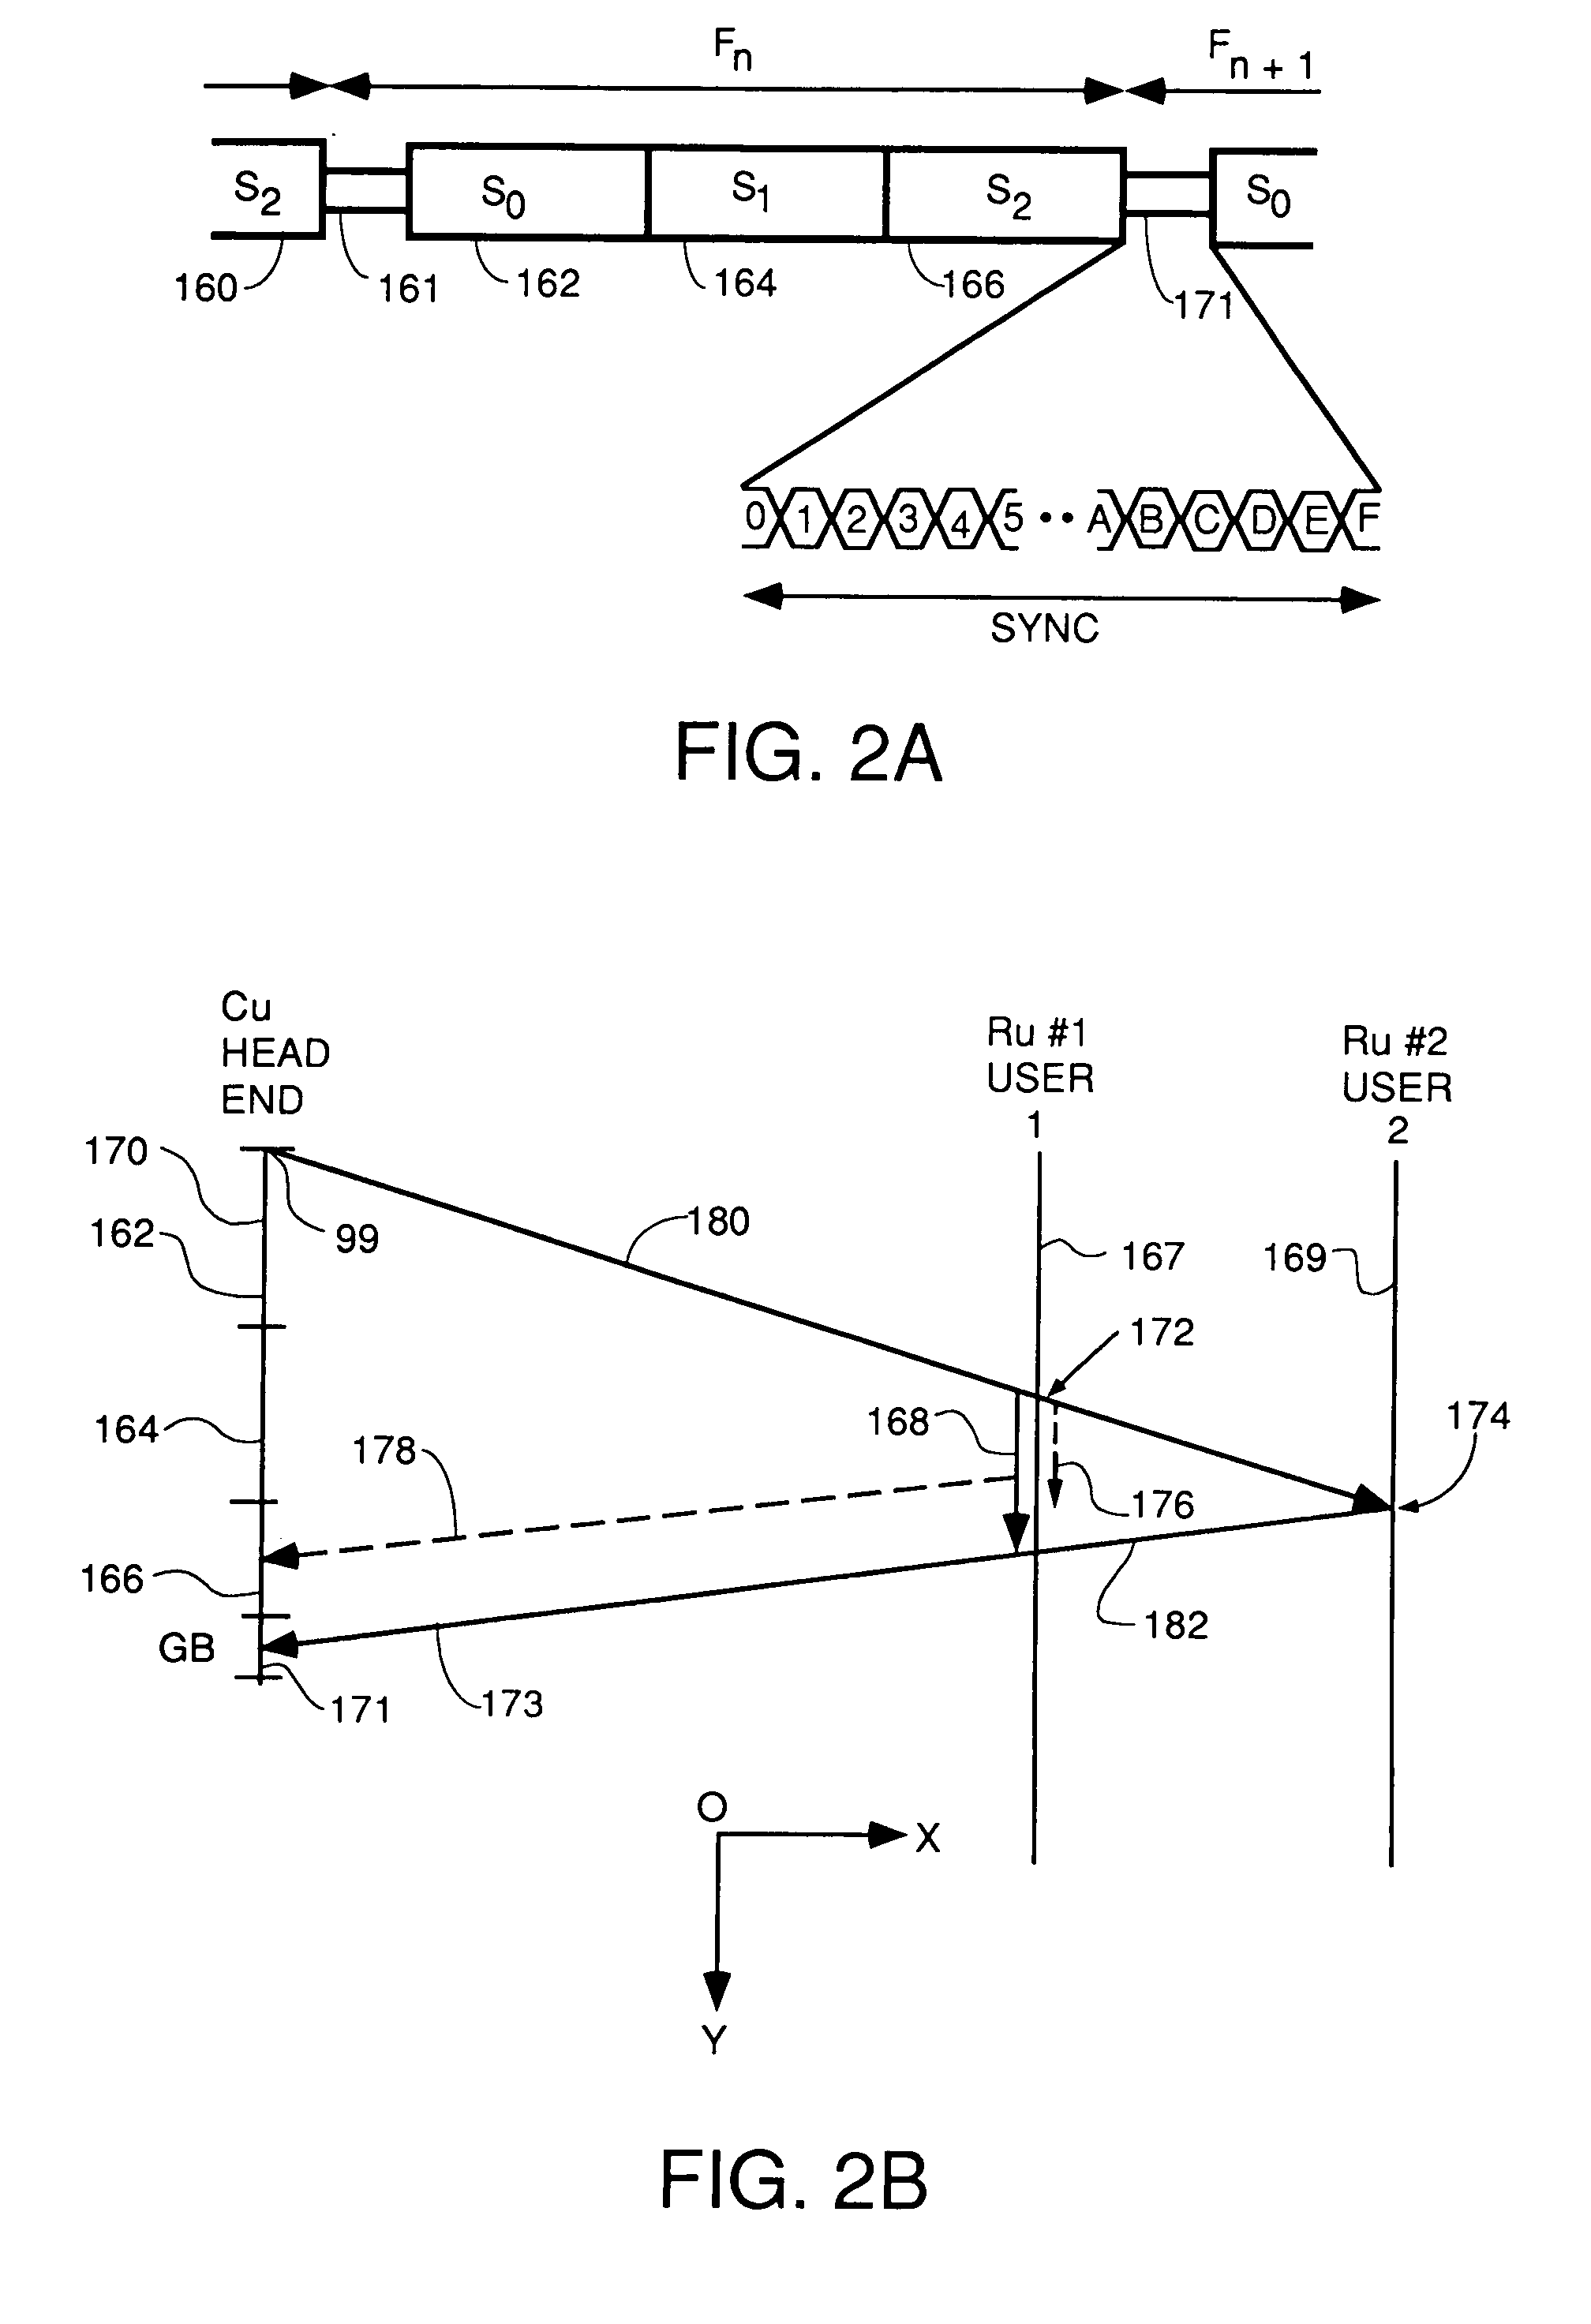 Apparatus and method for trellis encoding data for transmission in digital data transmission systems